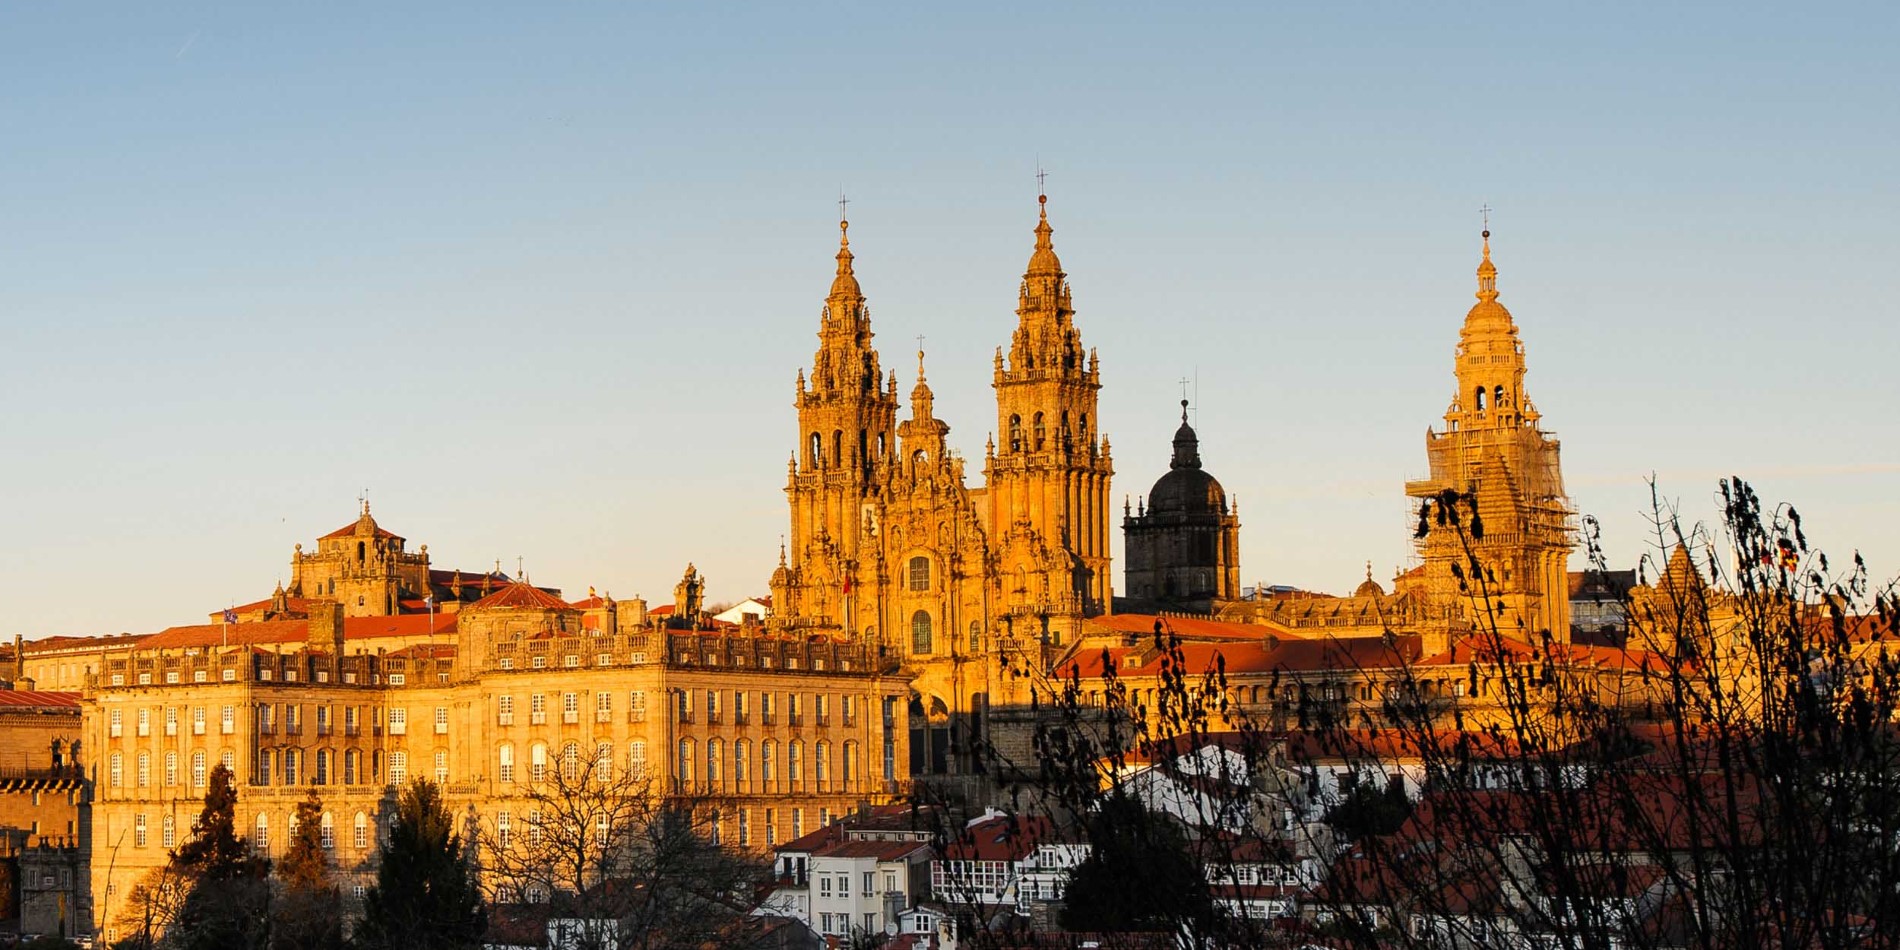 View of the Cathedral of Santiago de Compostela